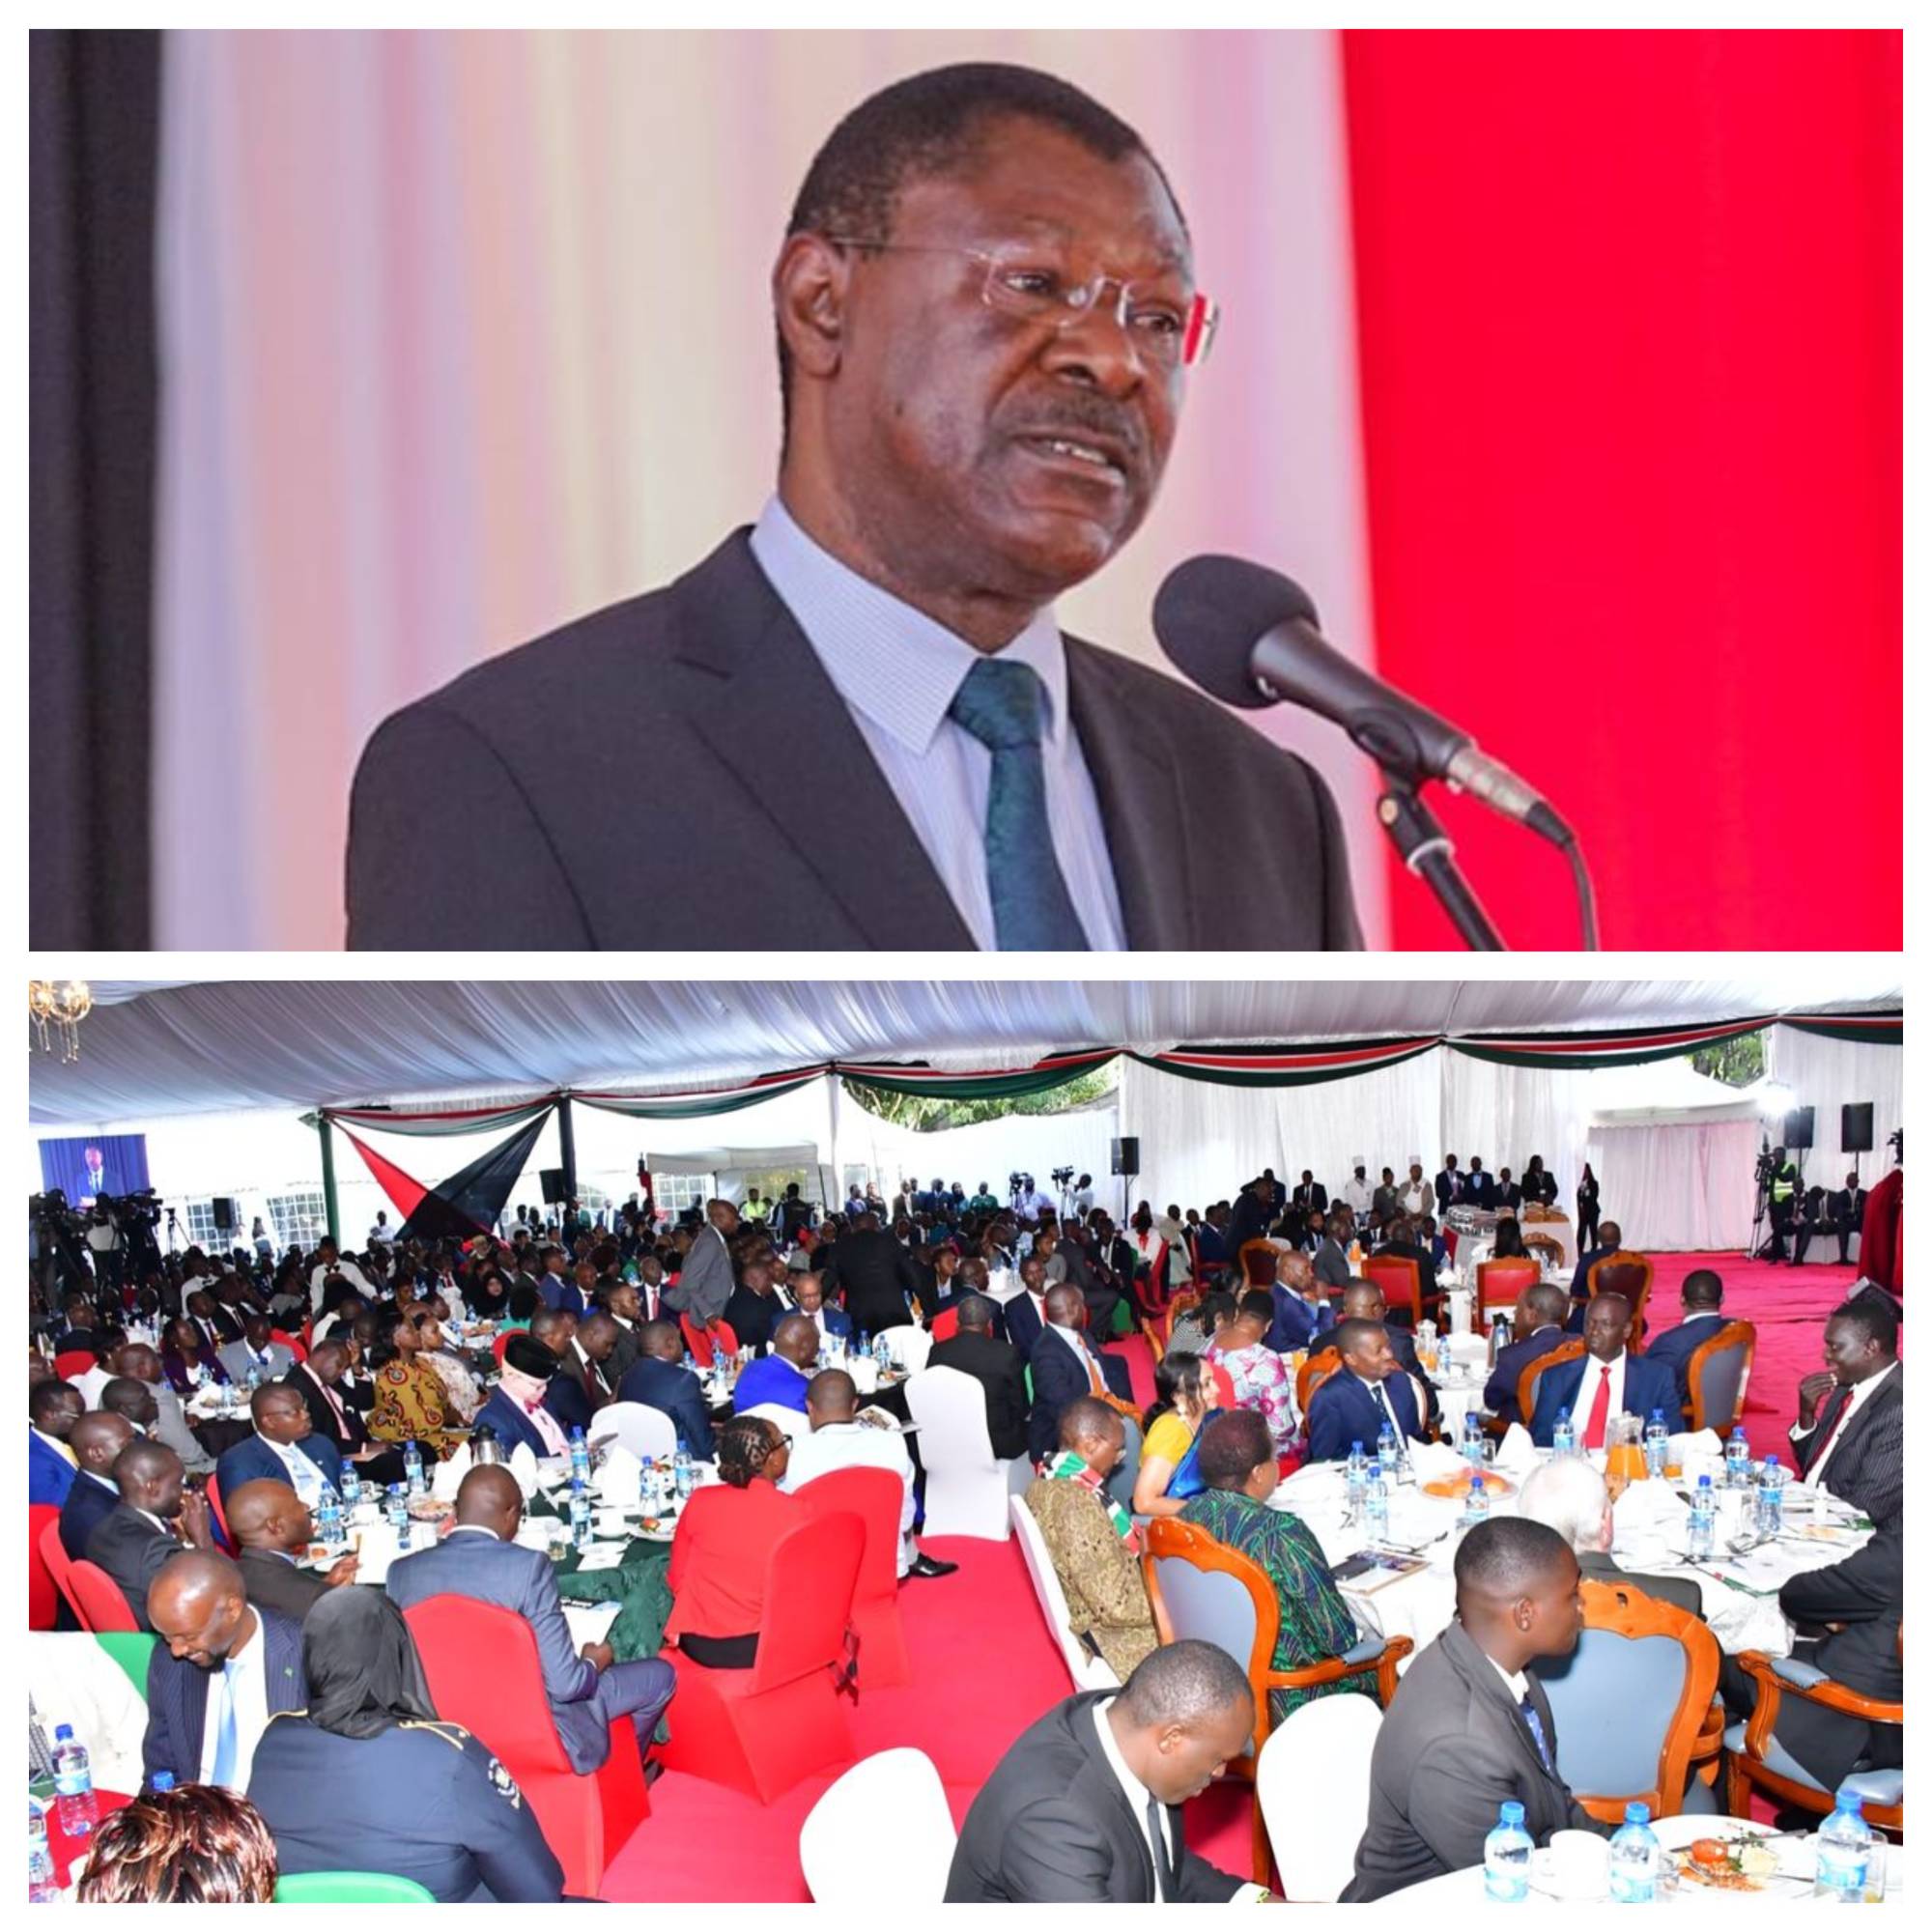 THE ANNUAL NATIONAL PRAYER BREAKFAST TO BE HELD EVERY LAST THURSDAY OF MAY, DIRECTS SPEAKER WETANG'ULA